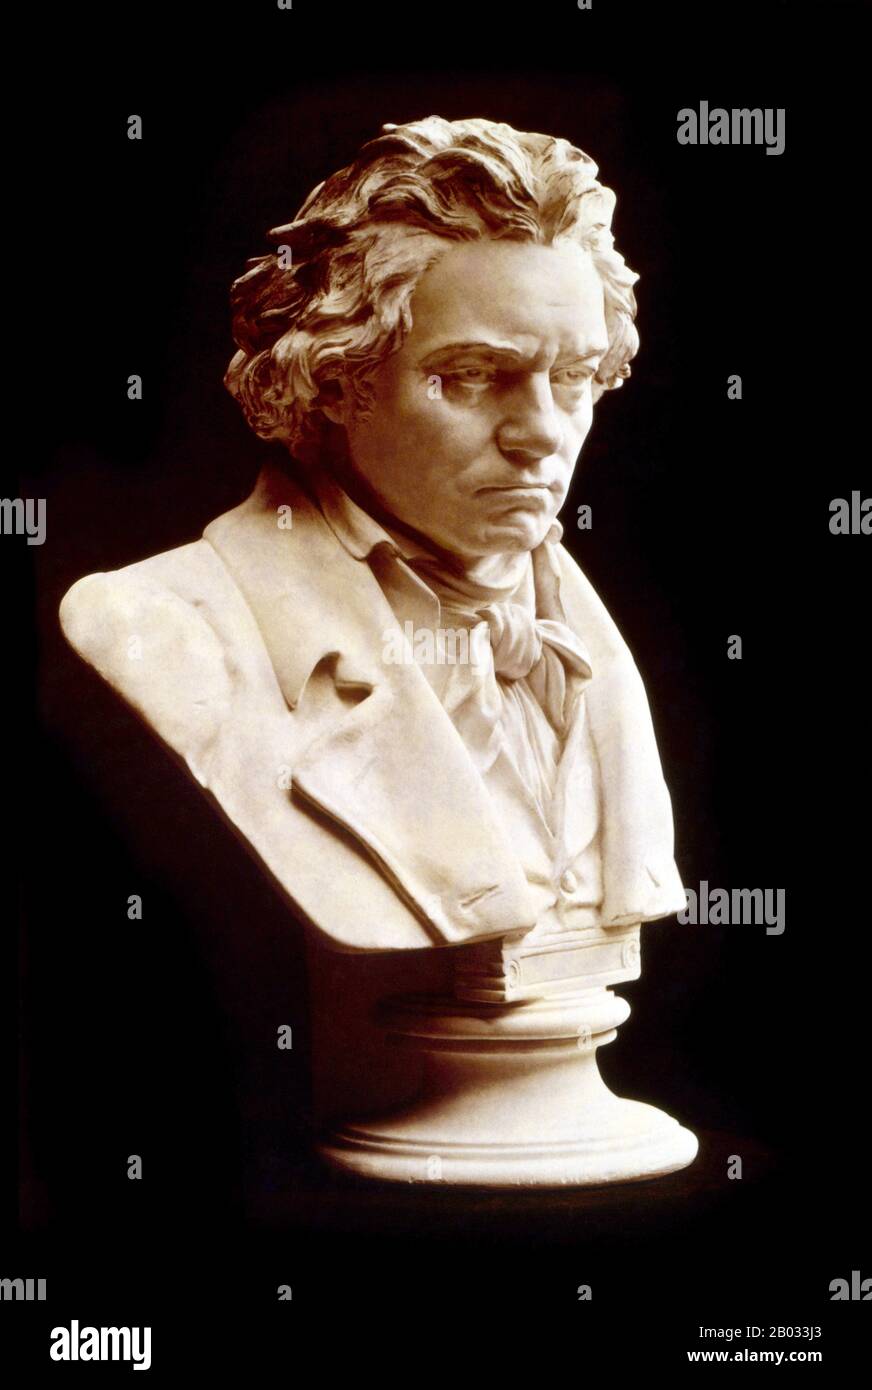 Ludwig van Beethoven (17 December 1770 – 26 March 1827) was a German  composer. A crucial figure in the transition between the Classical and  Romantic eras in Western art music, he remains